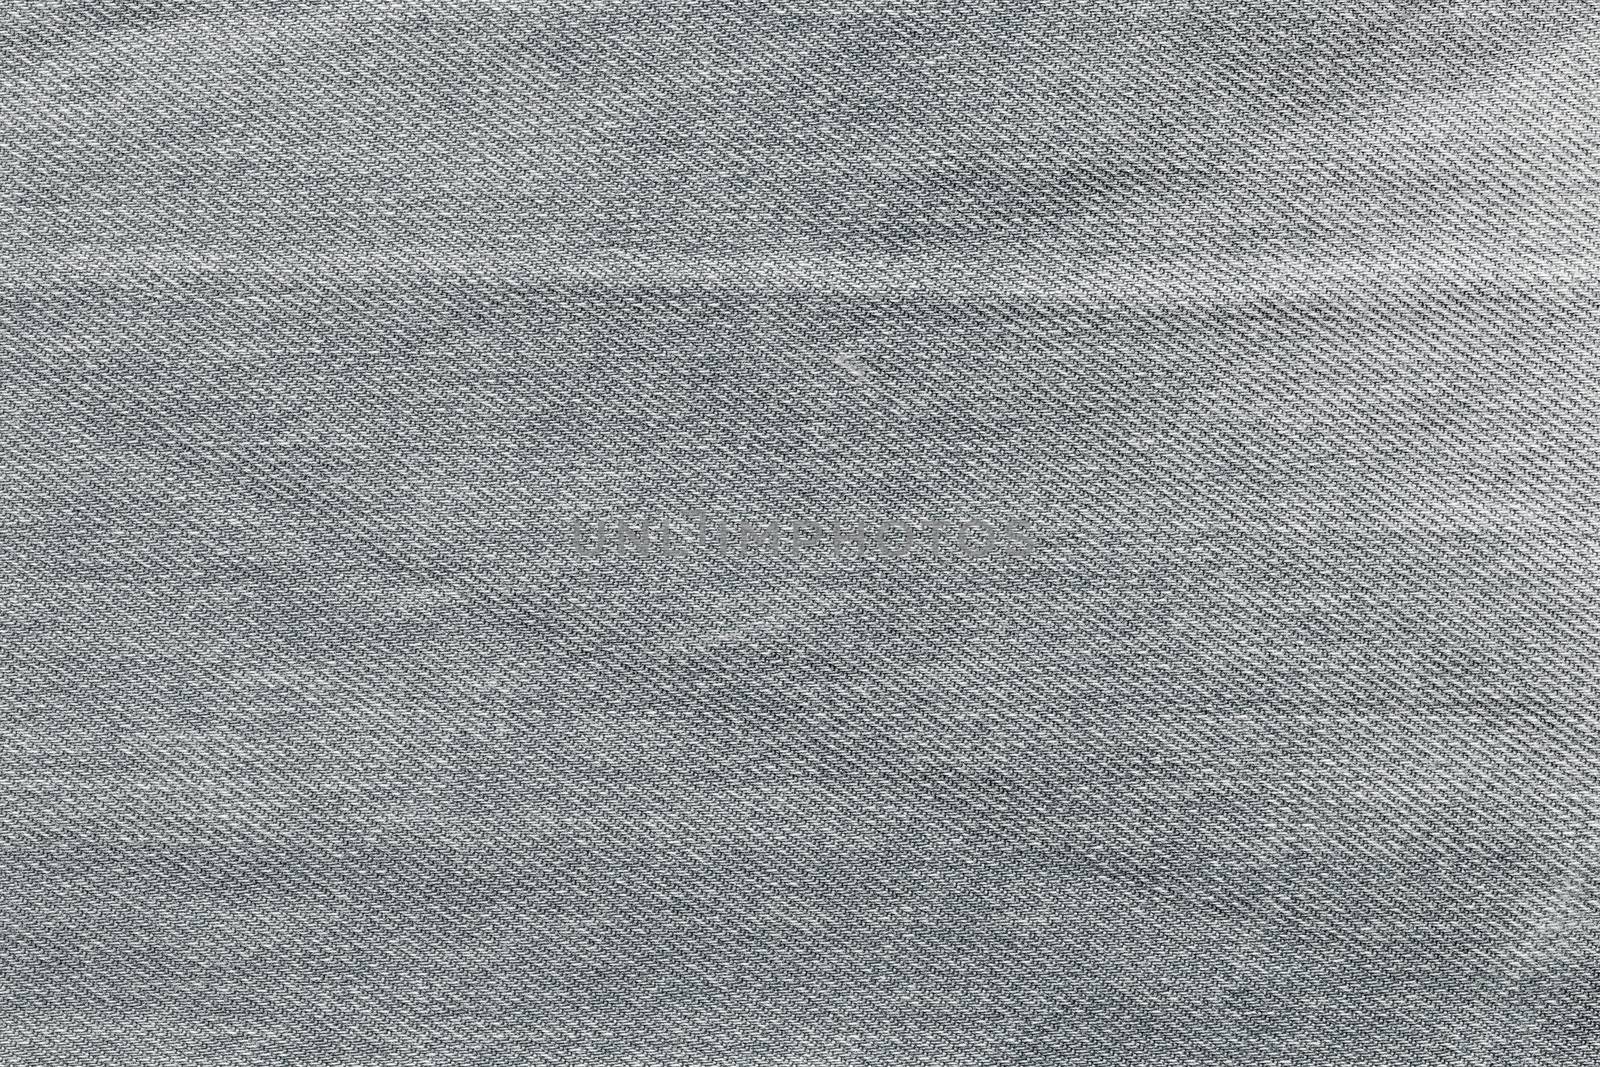 Gray background, denim jeans background. Jeans texture, fabric. by ivo_13